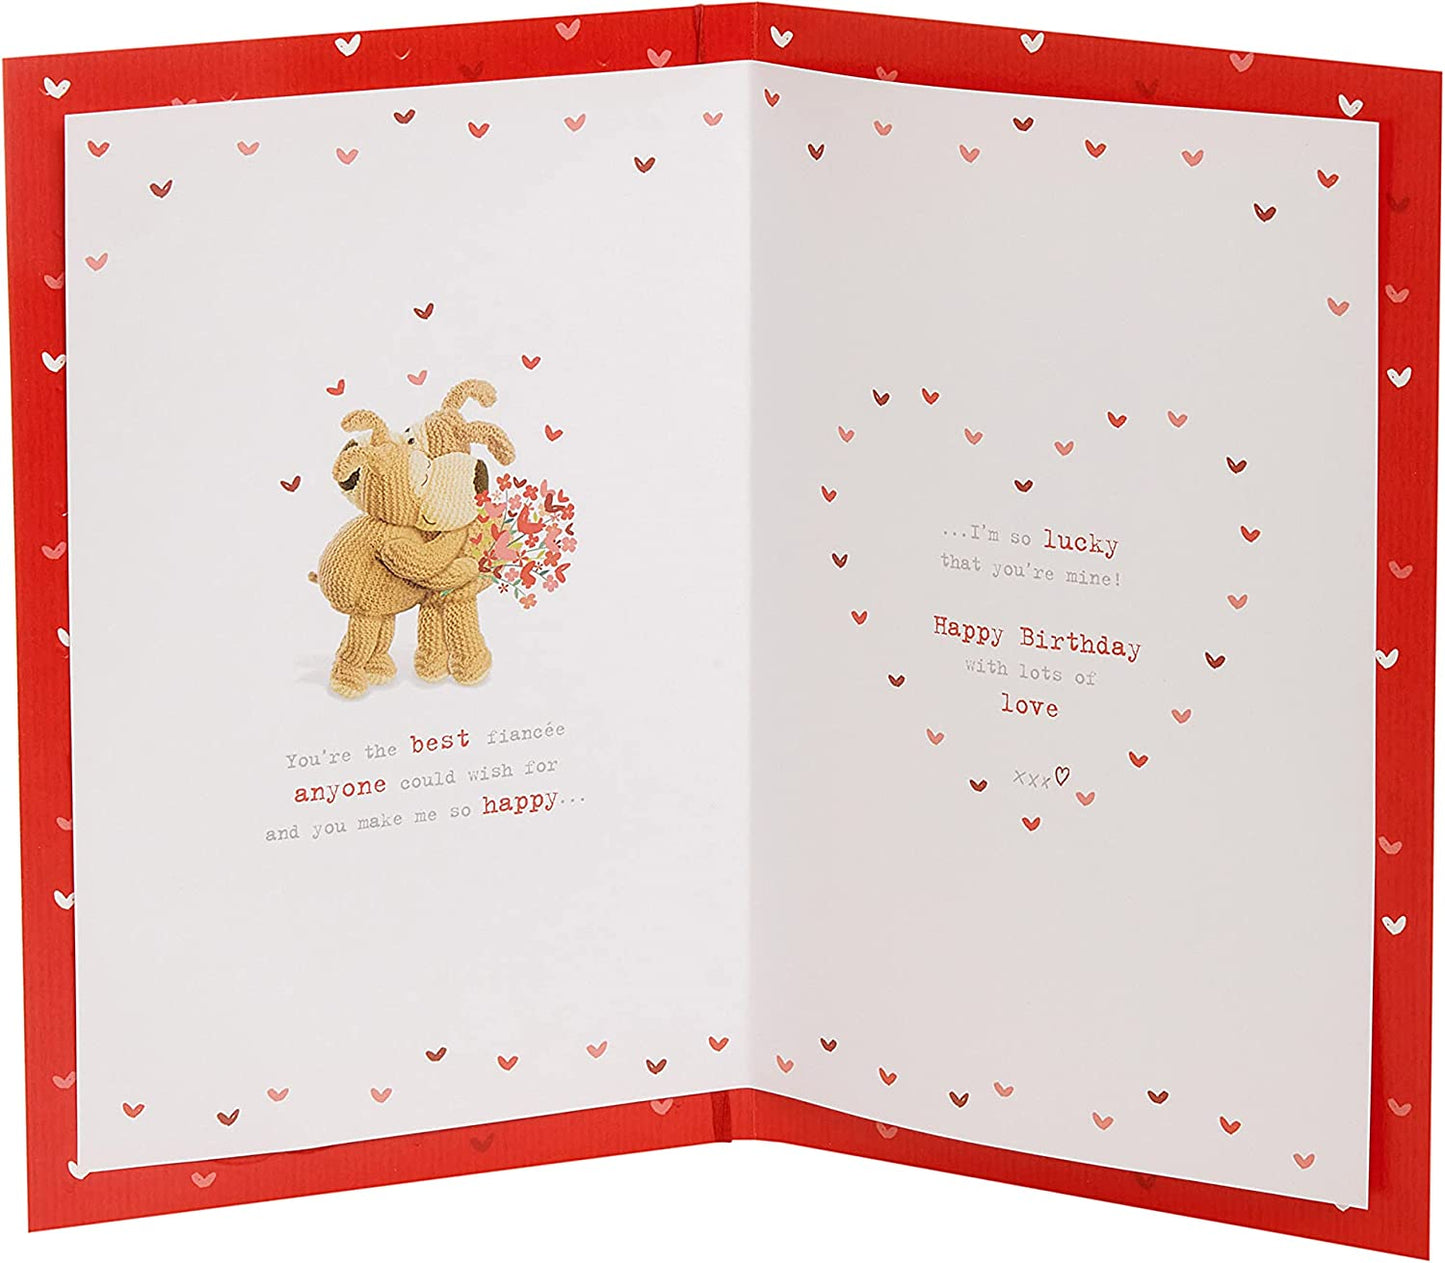 Cute Design And Big Bouquet Of Flowers Boofle Fiancée Birthday Card